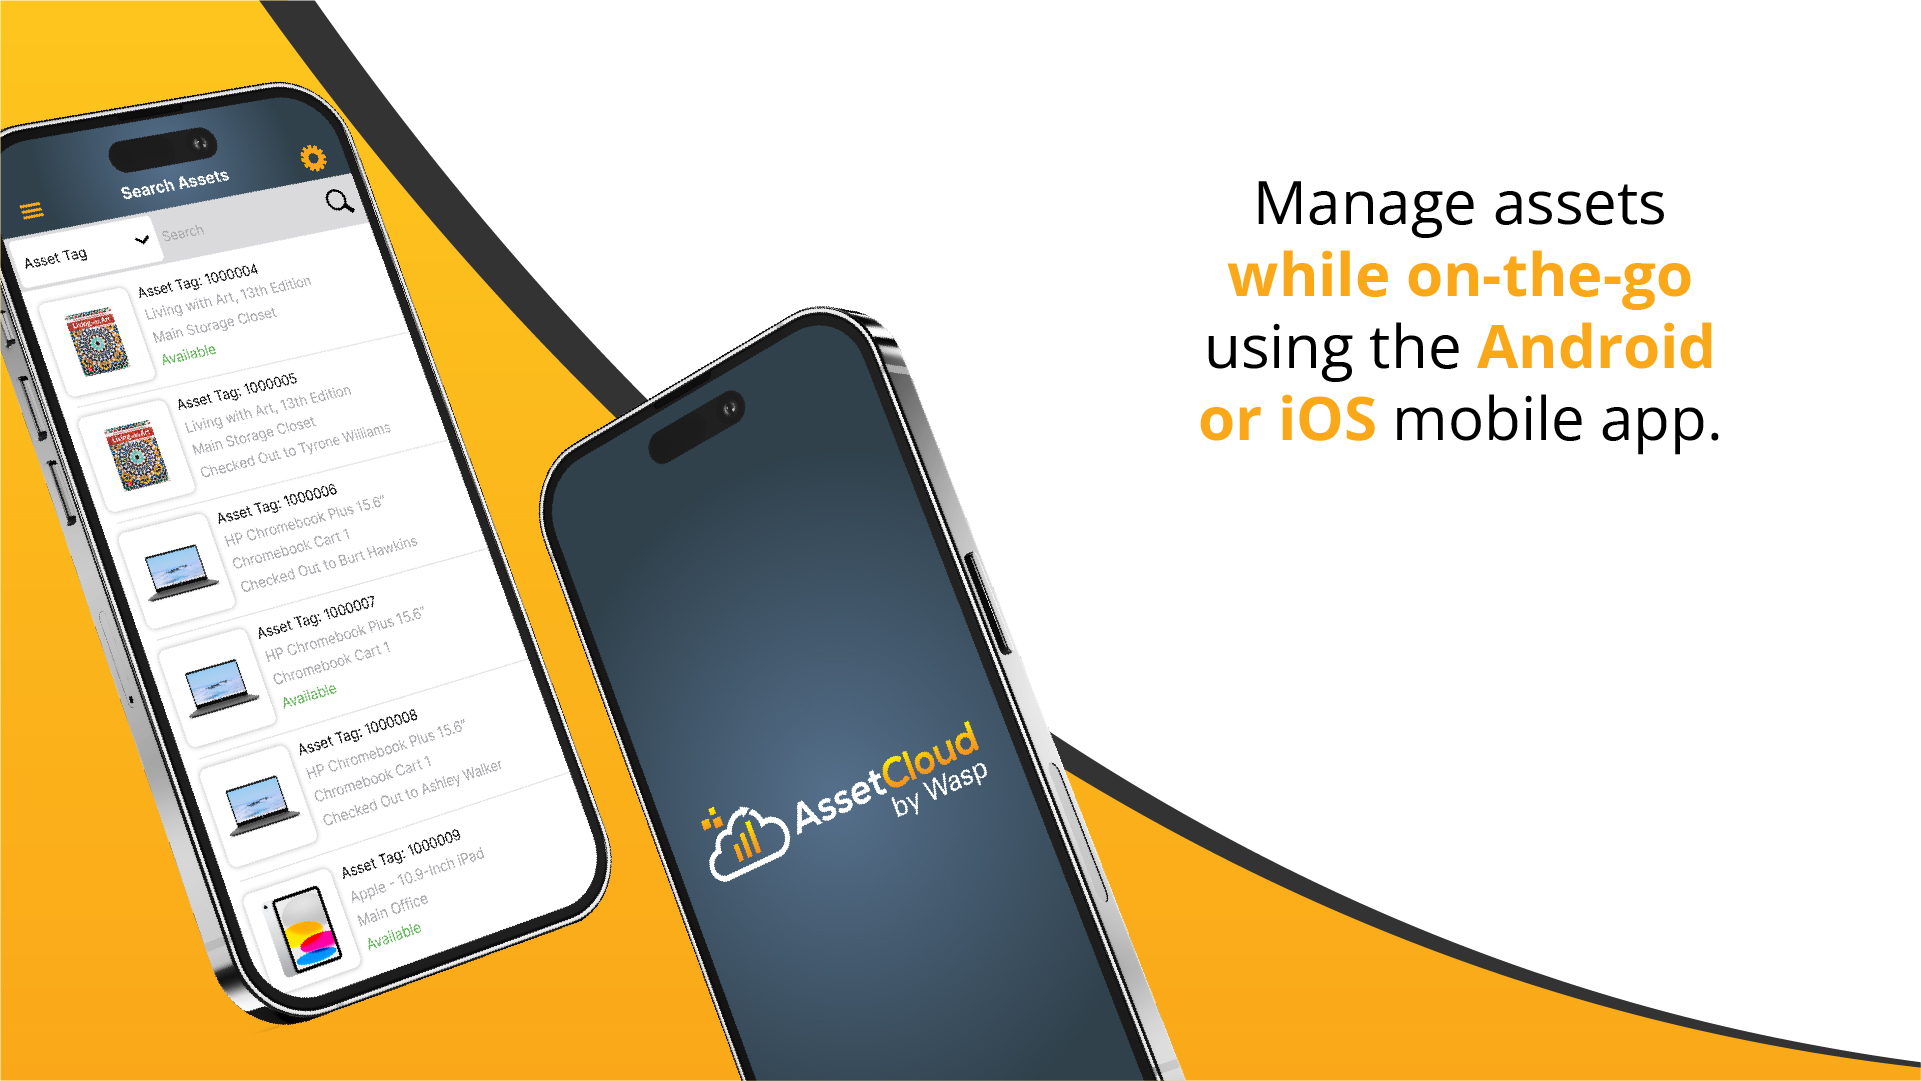 Manage assets while on-the-go using the Android or iOS mobile app